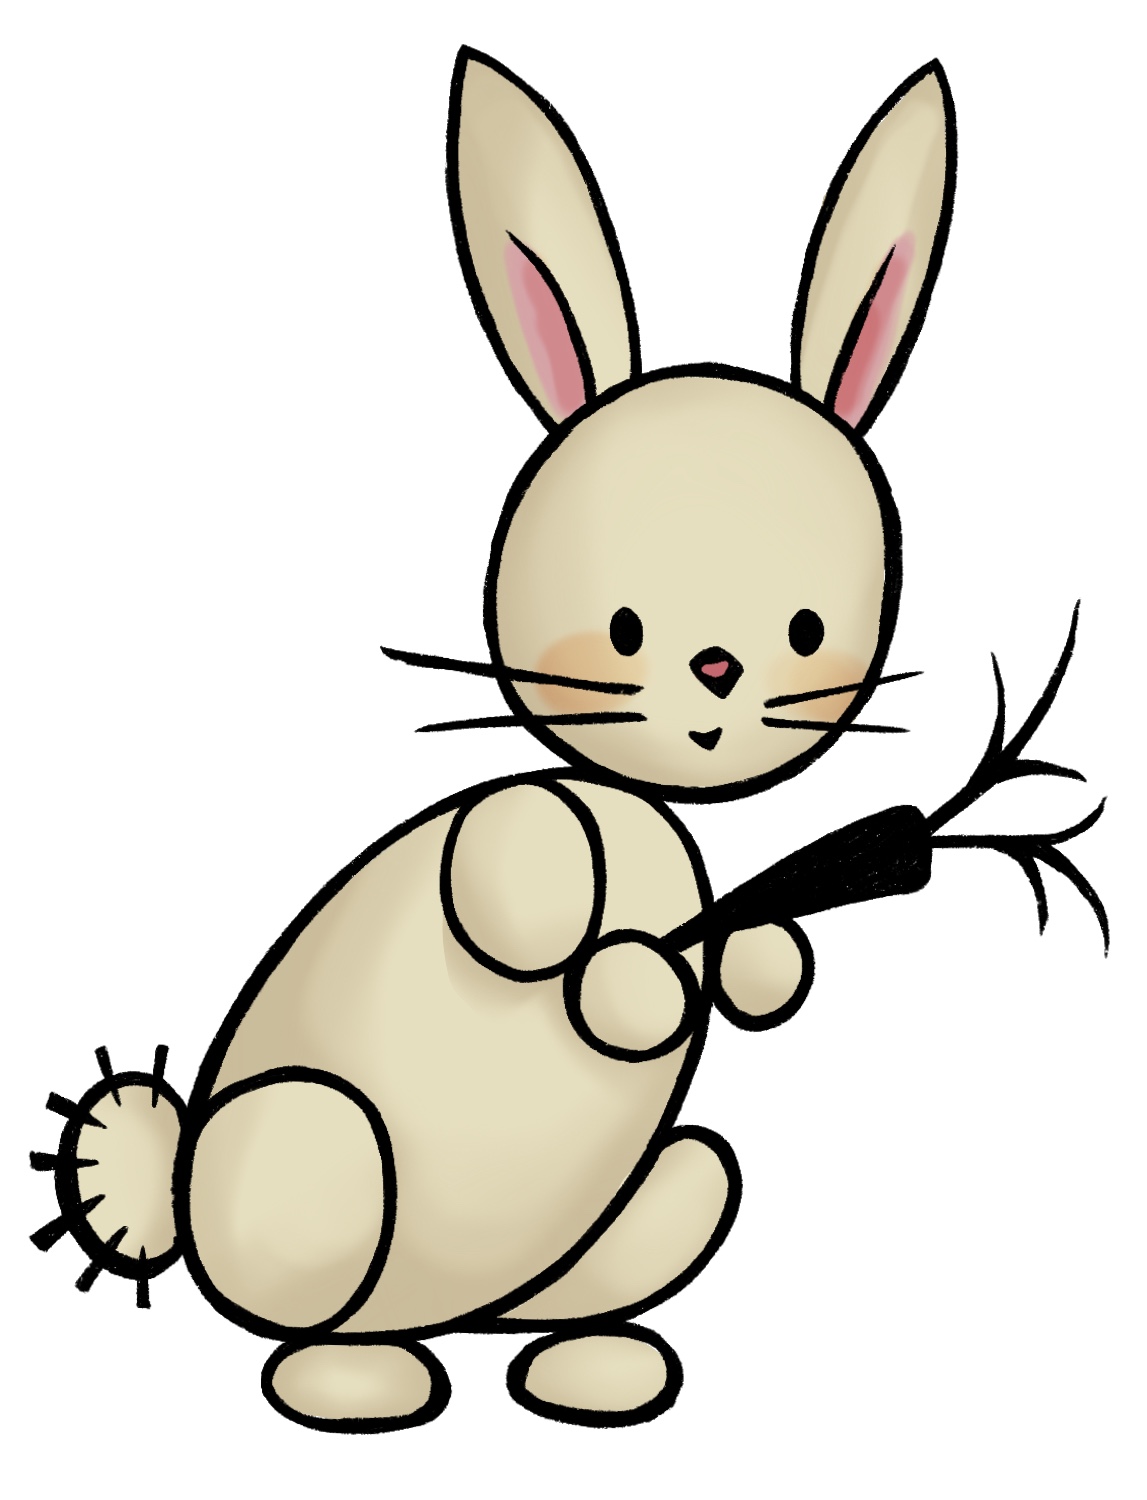 Rabbit Drawing - How To Draw A Rabbit Step By Step-nextbuild.com.vn